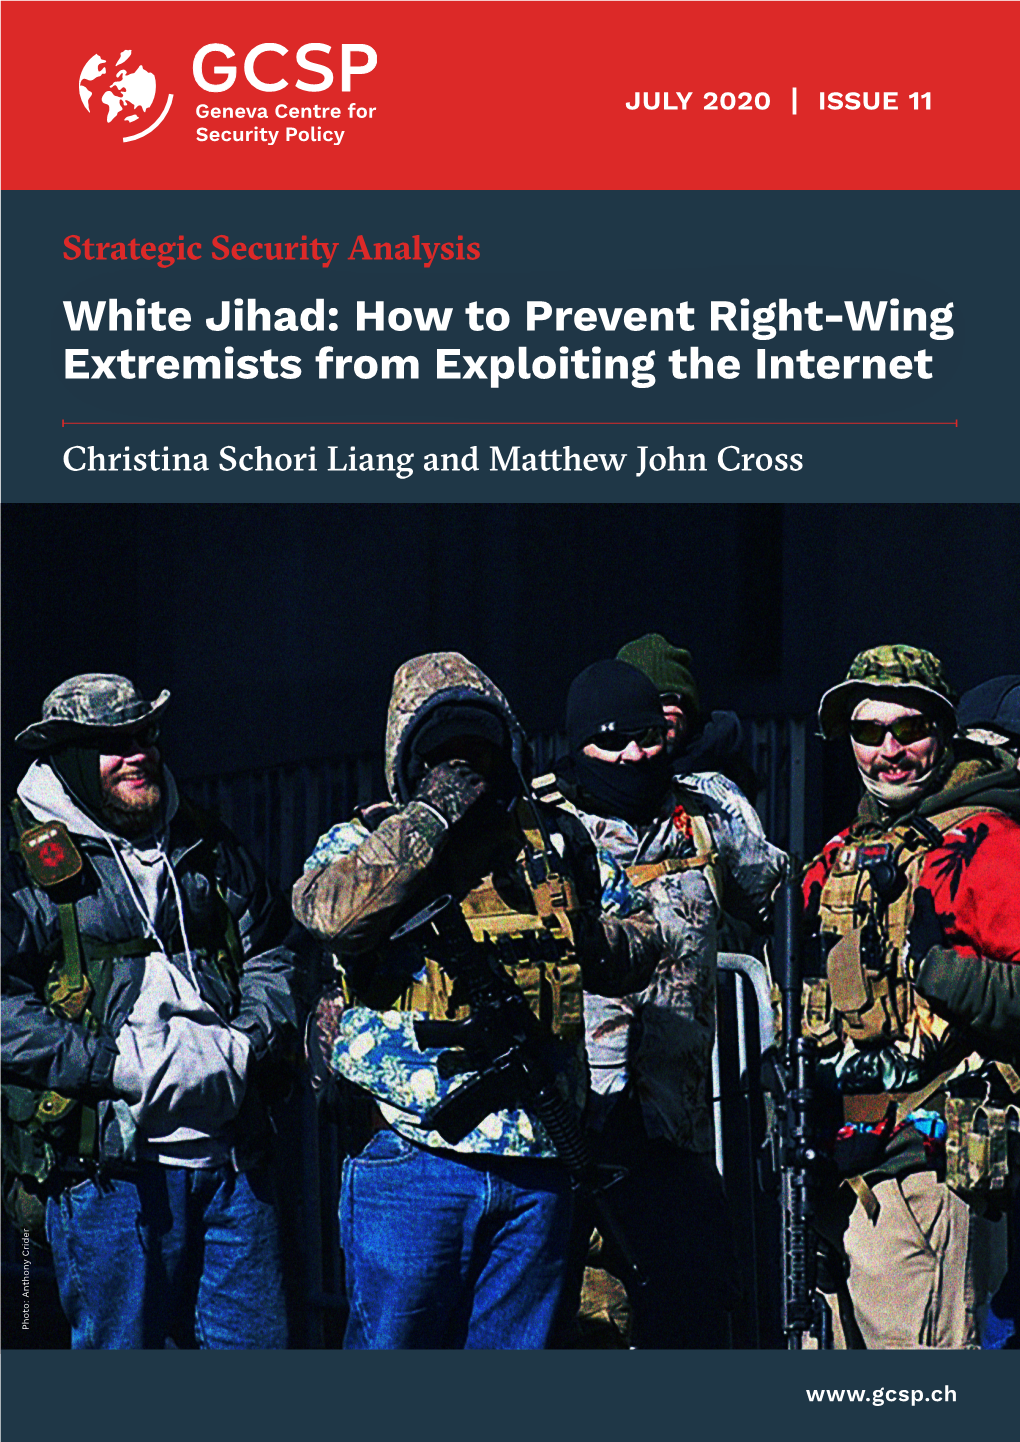 White Jihad: How to Prevent Right-Wing Extremists from Exploiting the Internet